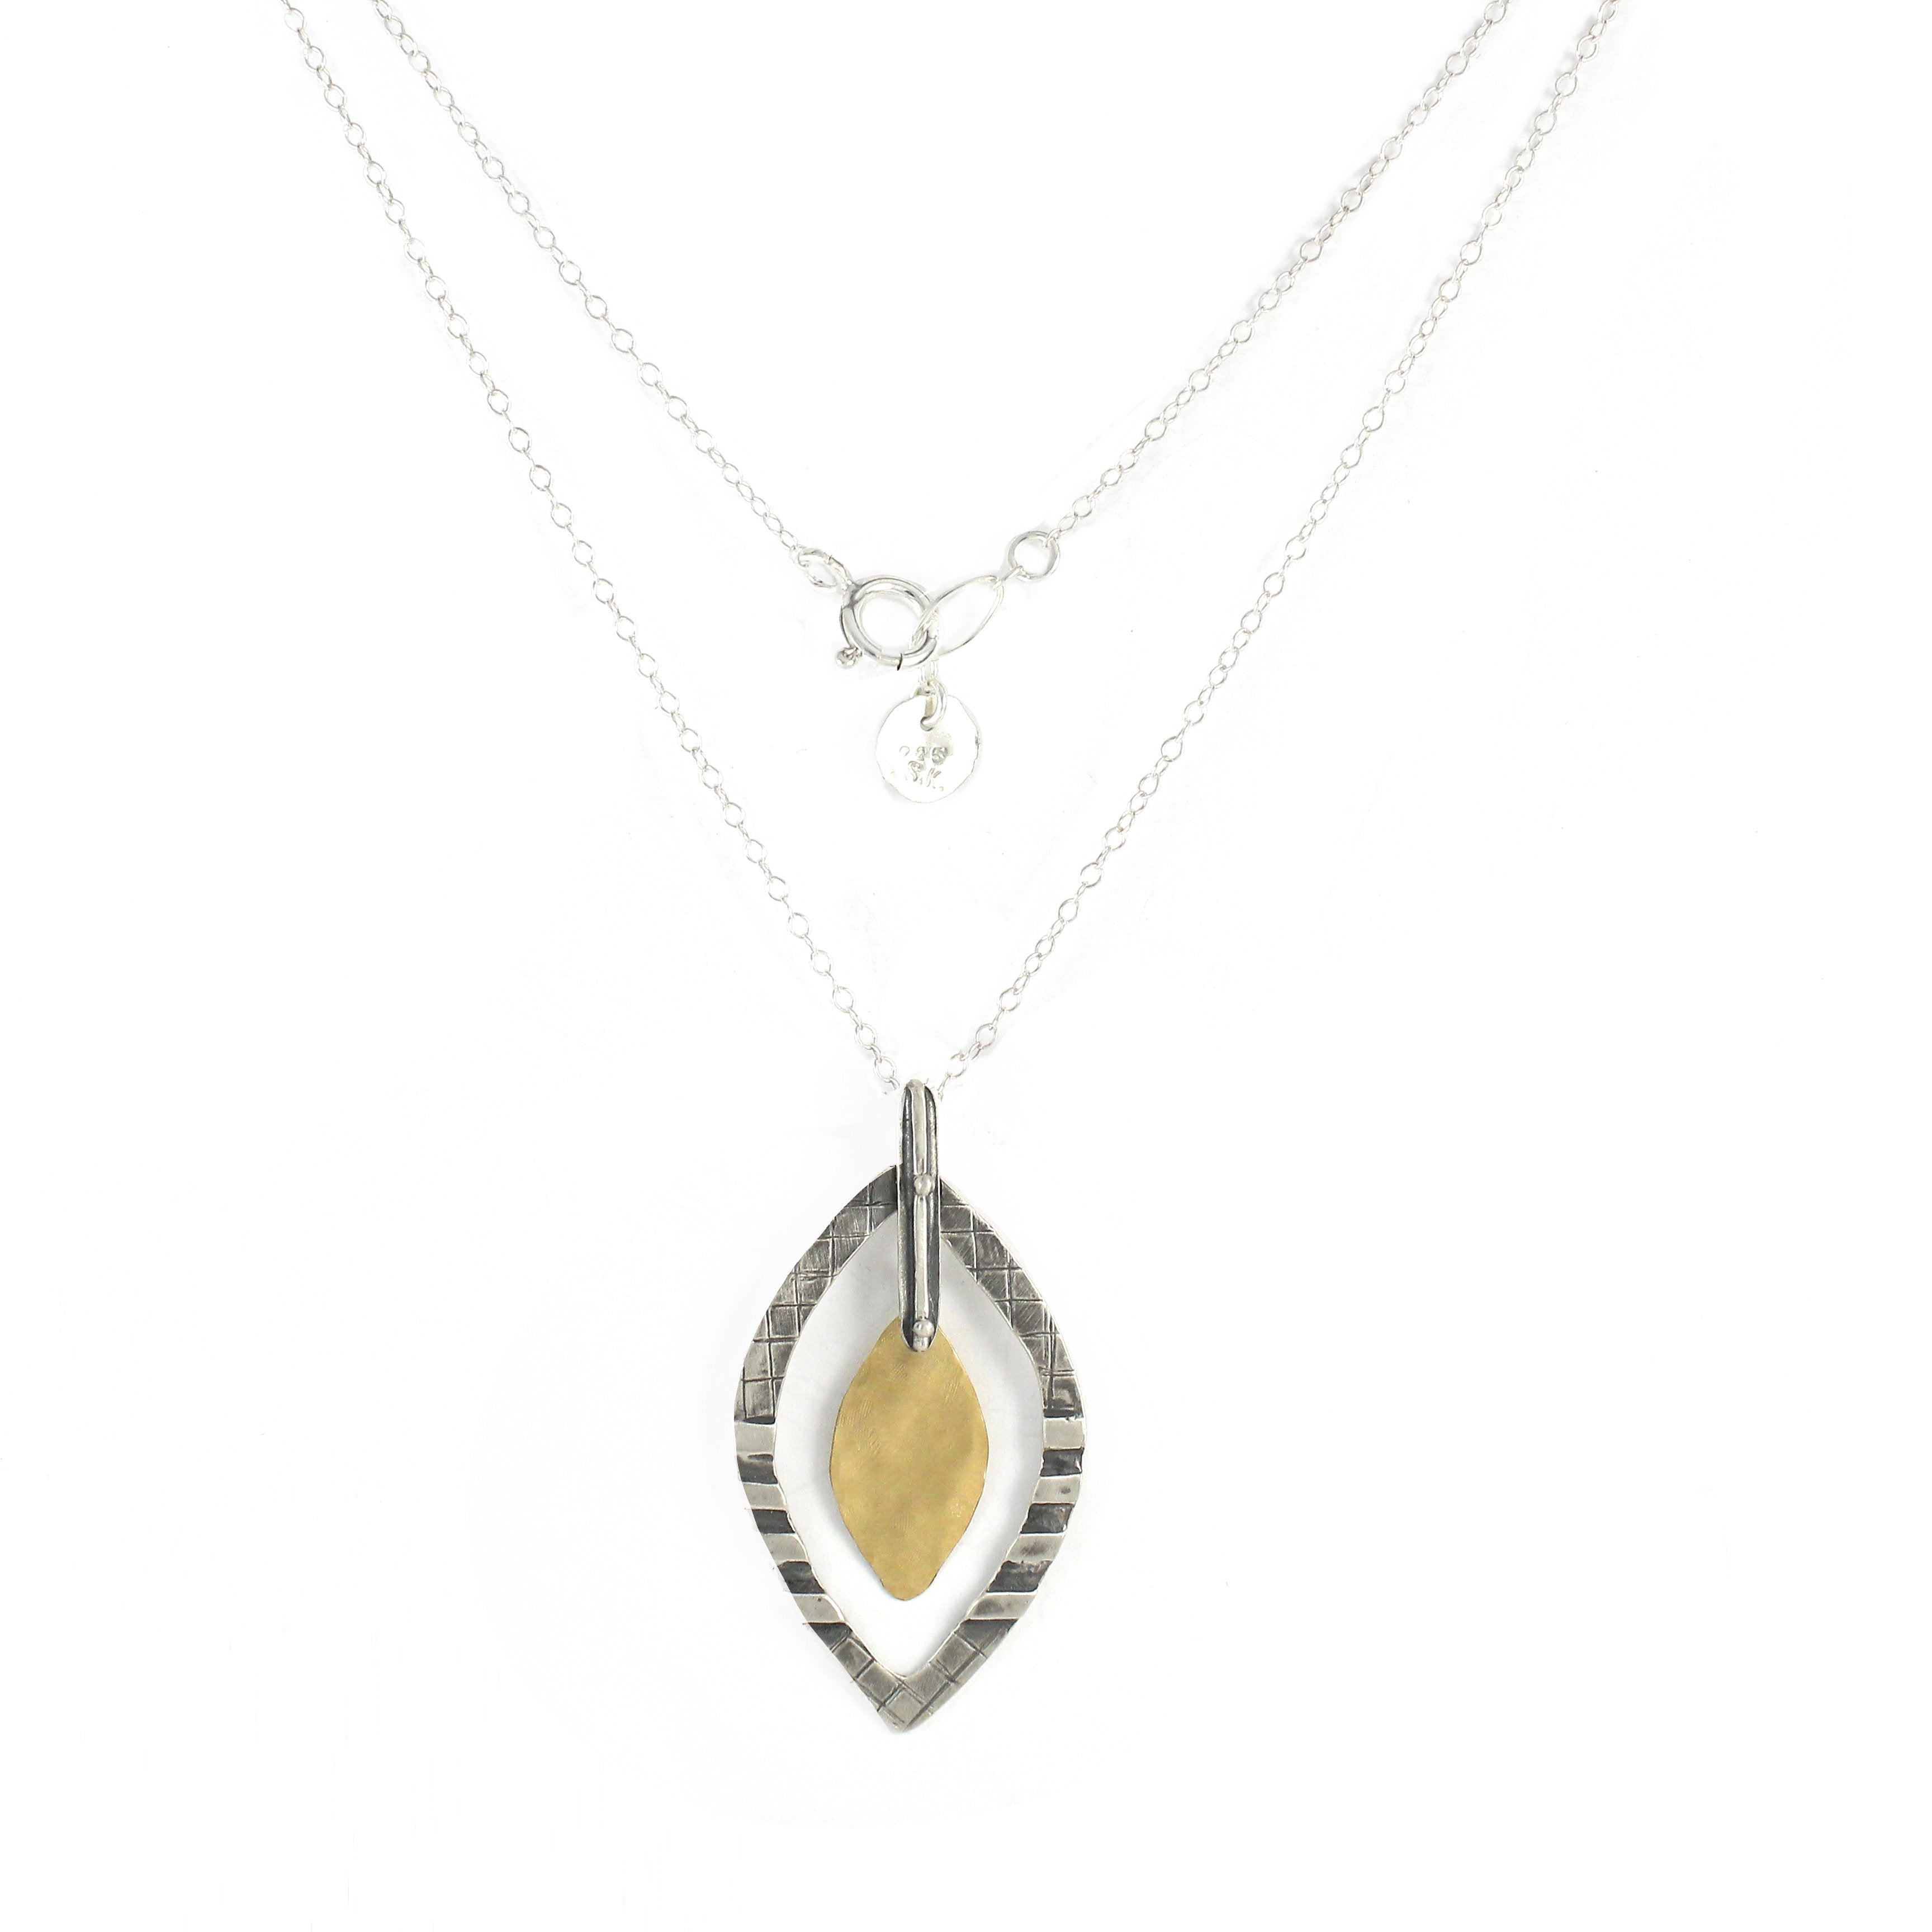 Western Moroccan Style Silver & Goldfield Medium Pendant Necklace - Shulamit Kanter